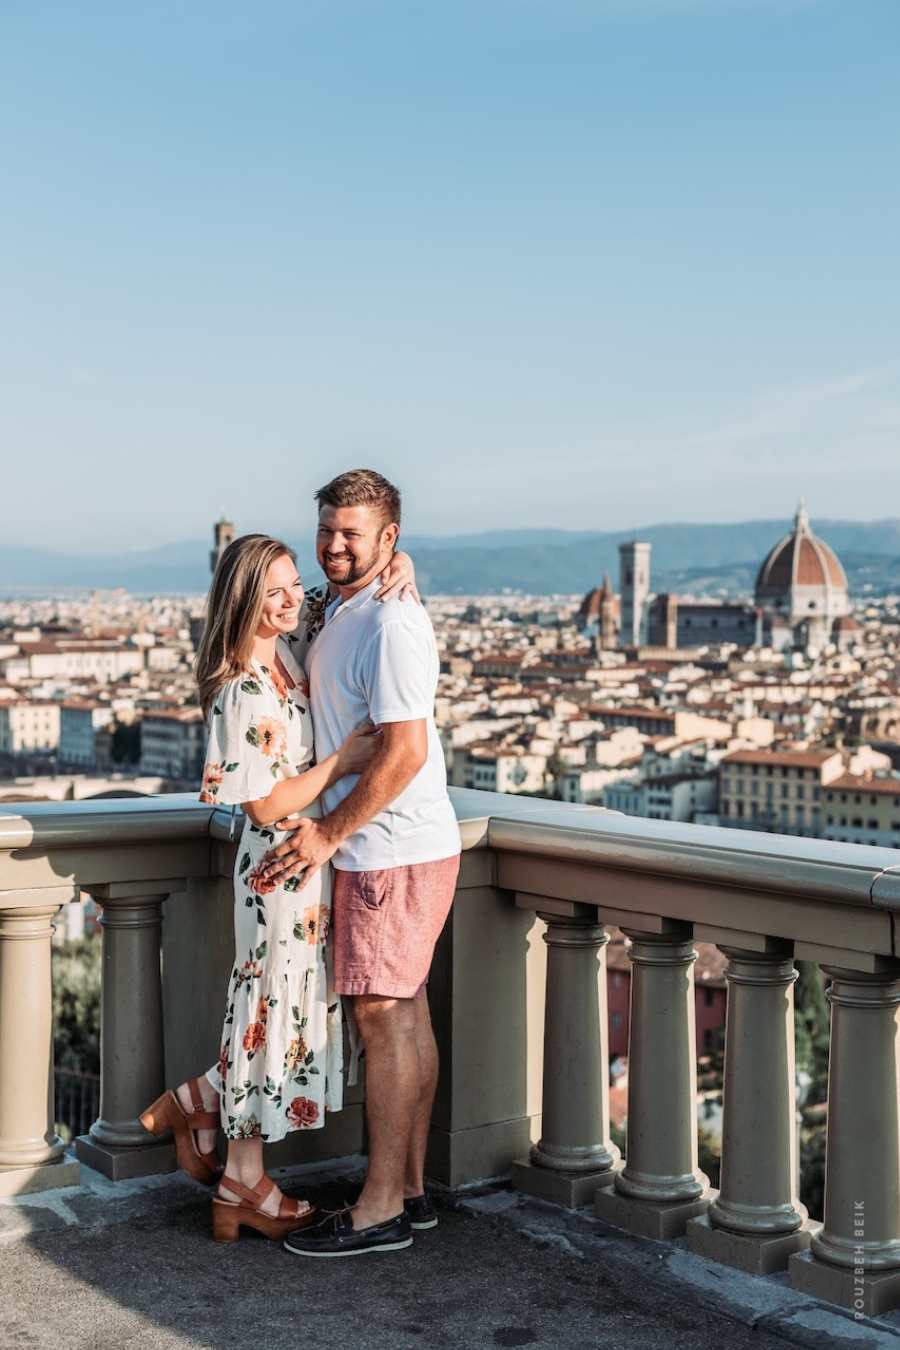 Must do photo locations in Florence